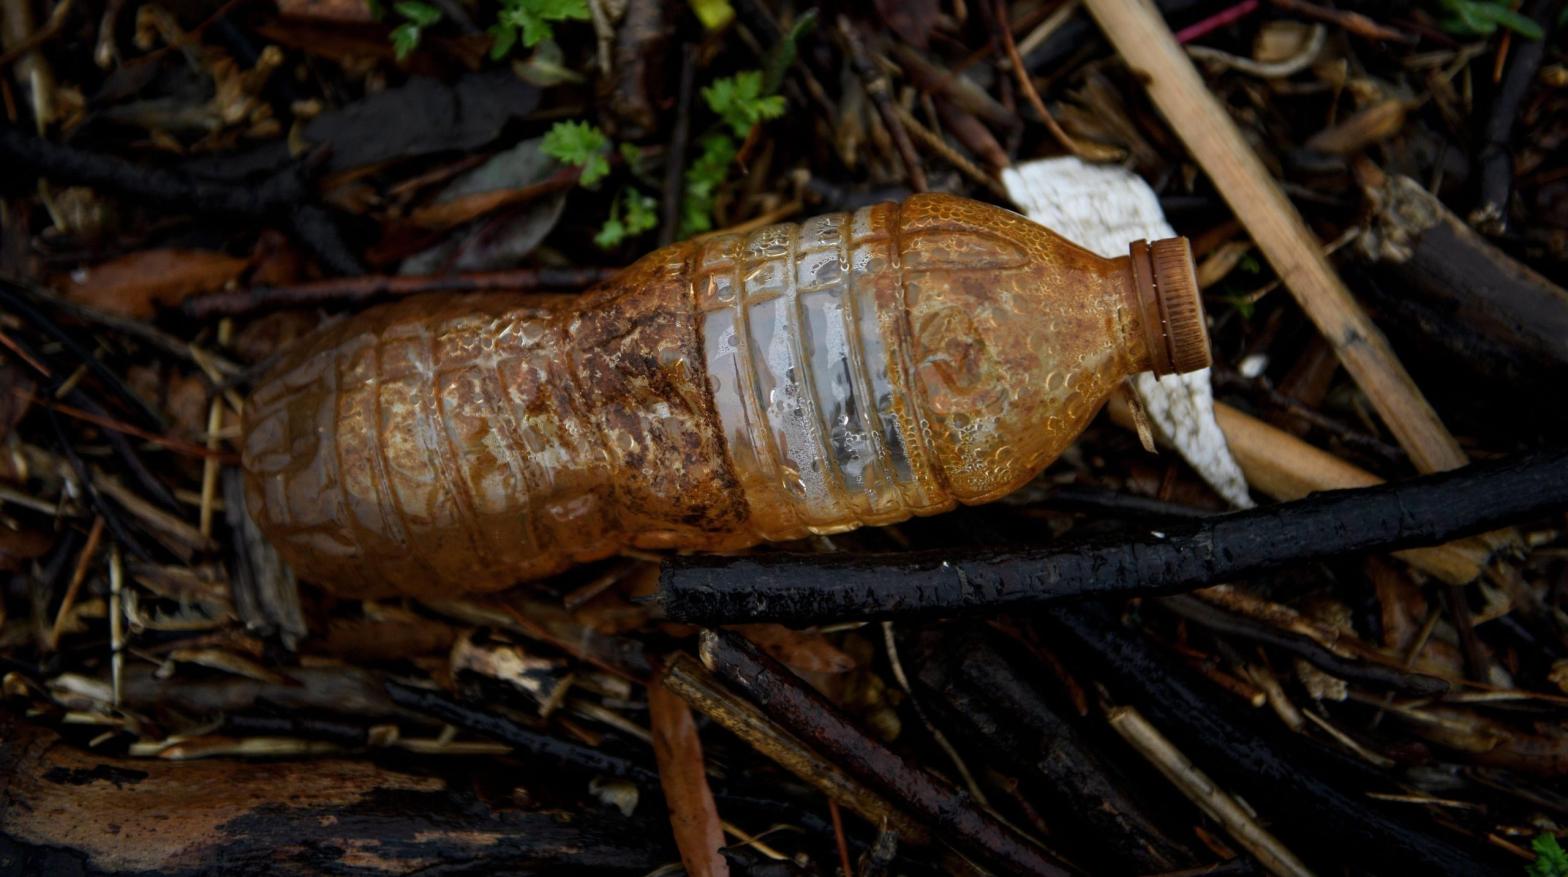 A plastic water bottle is seen washed up on the banks of the Anacostia River on March 21, 2019 in Washington, DC. (Photo: Brendan Smialowski / AFP, Getty Images)